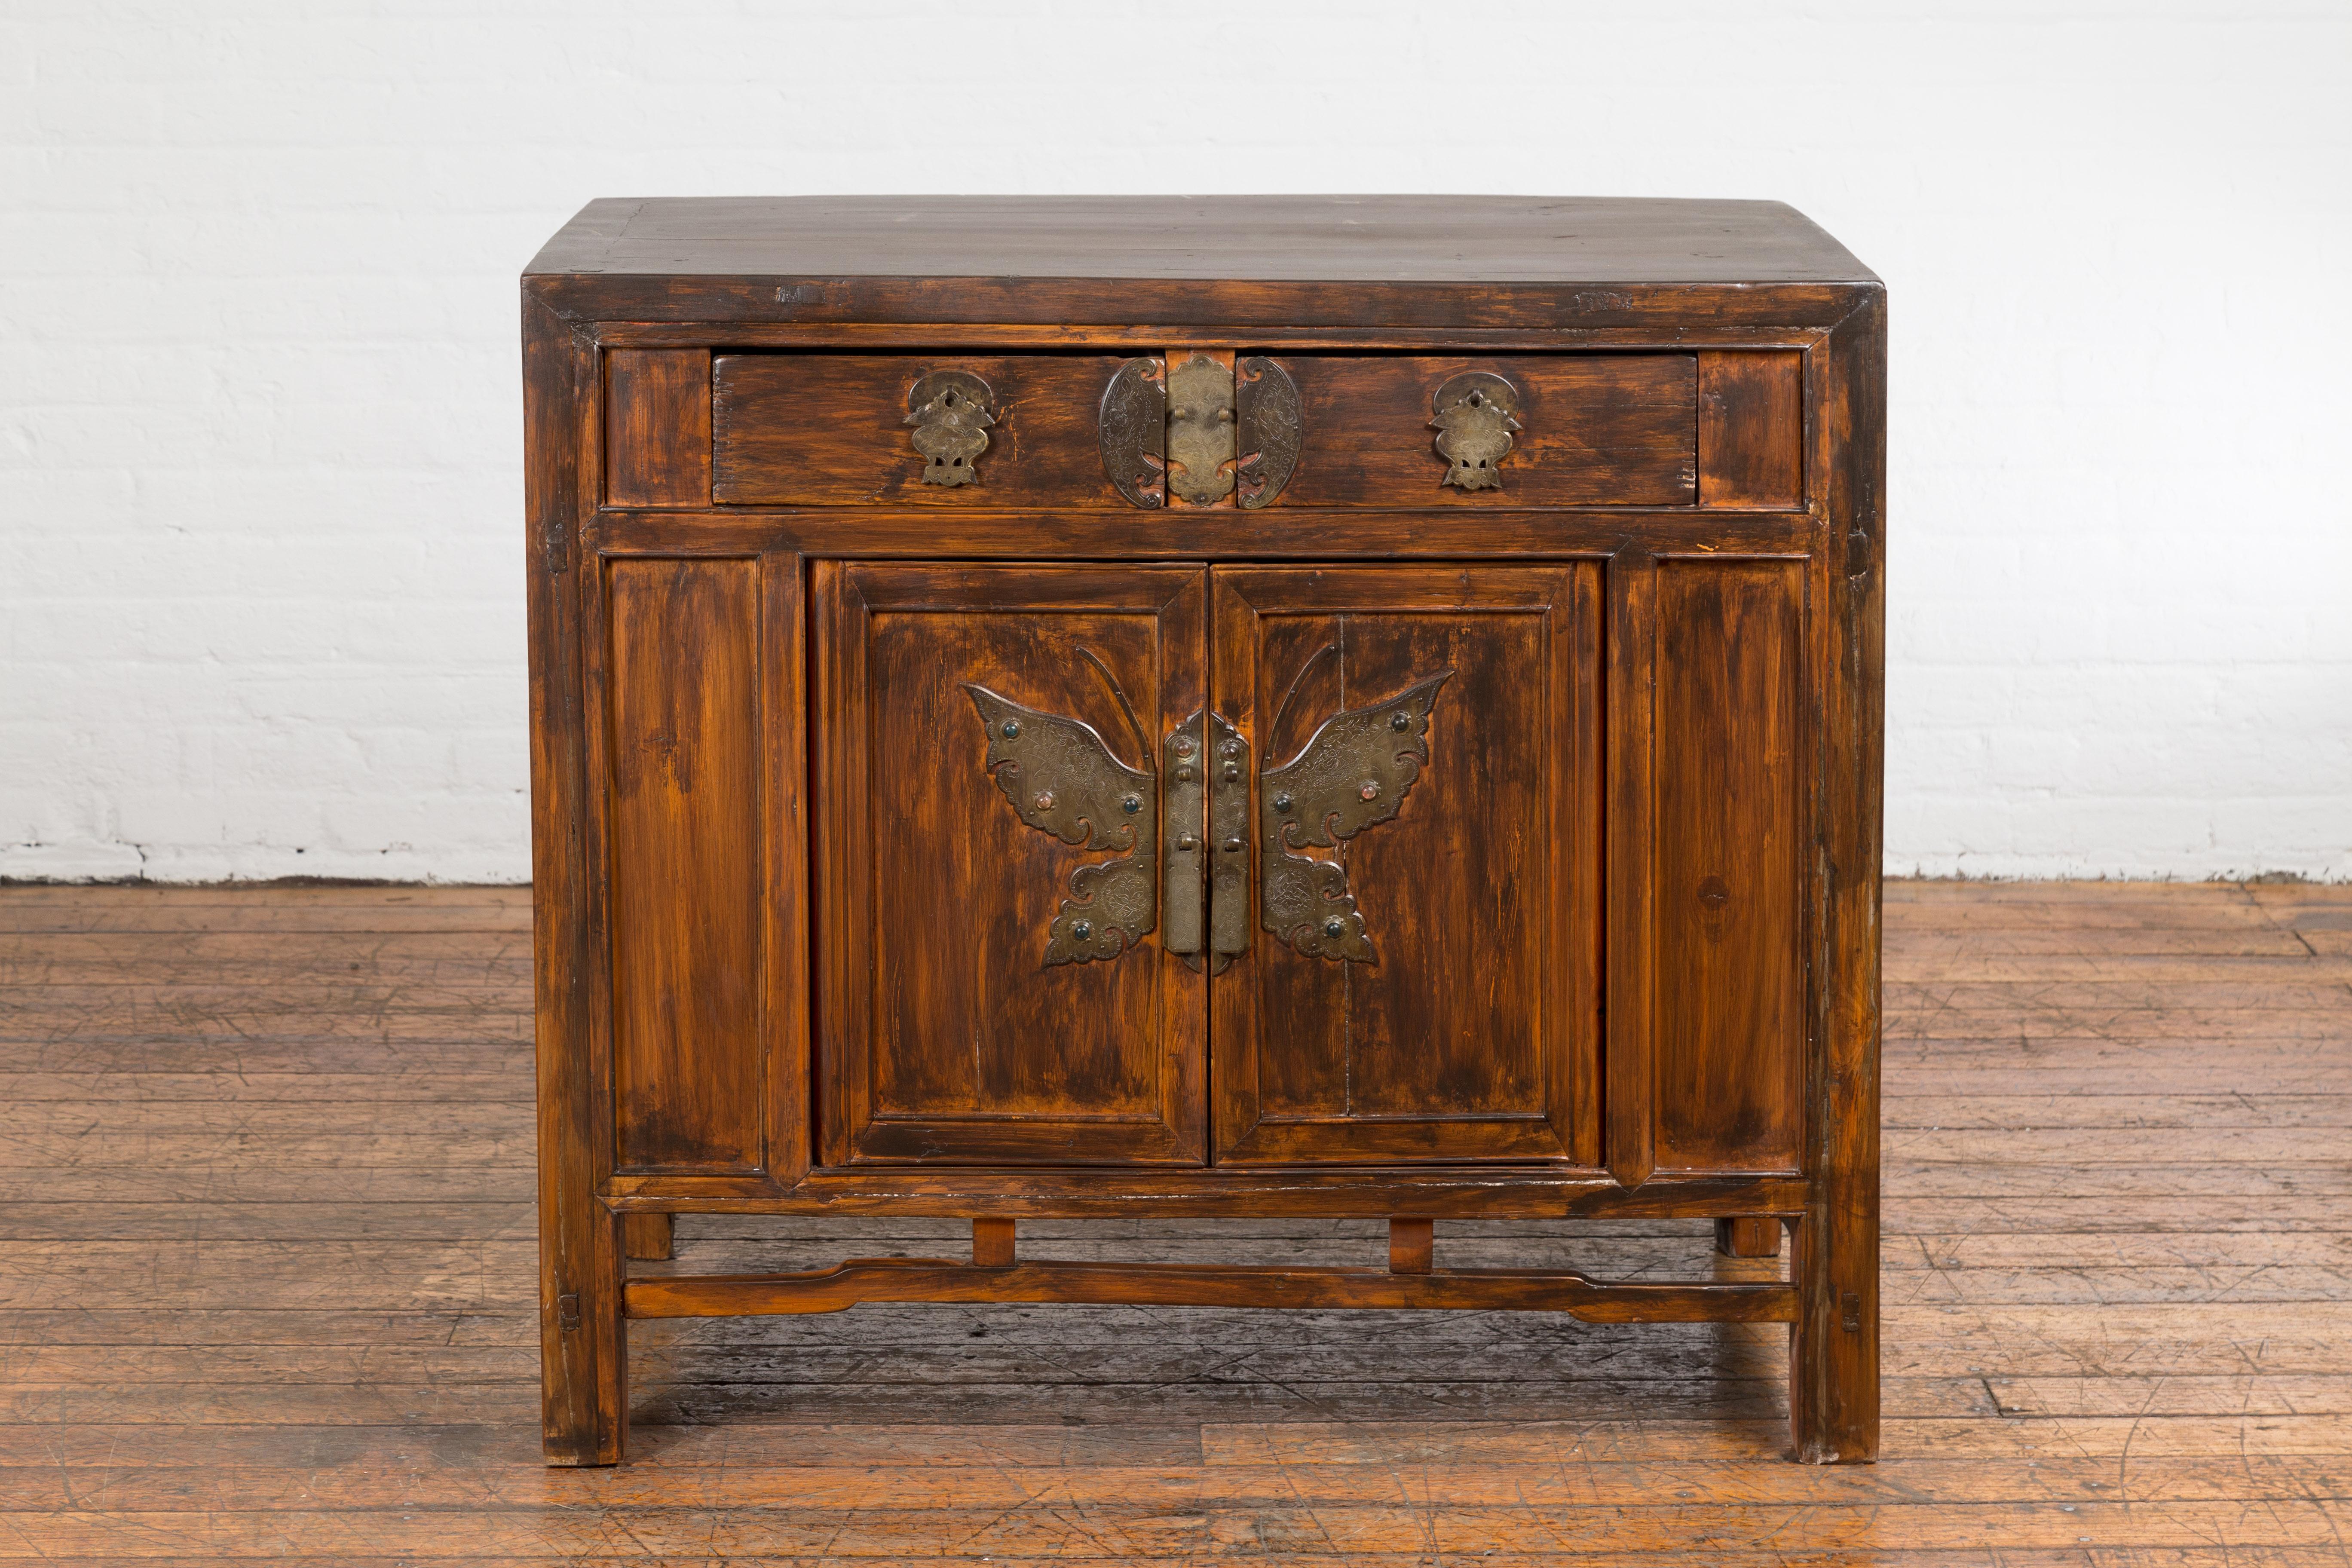 A Chinese Qing Dynasty cabinet from the 19th century with brass butterfly hardware, two drawers over a pair of double doors and distressed brown finish. Imbued with the rich heritage of Chinese craftsmanship, this 19th century Qing Dynasty cabinet